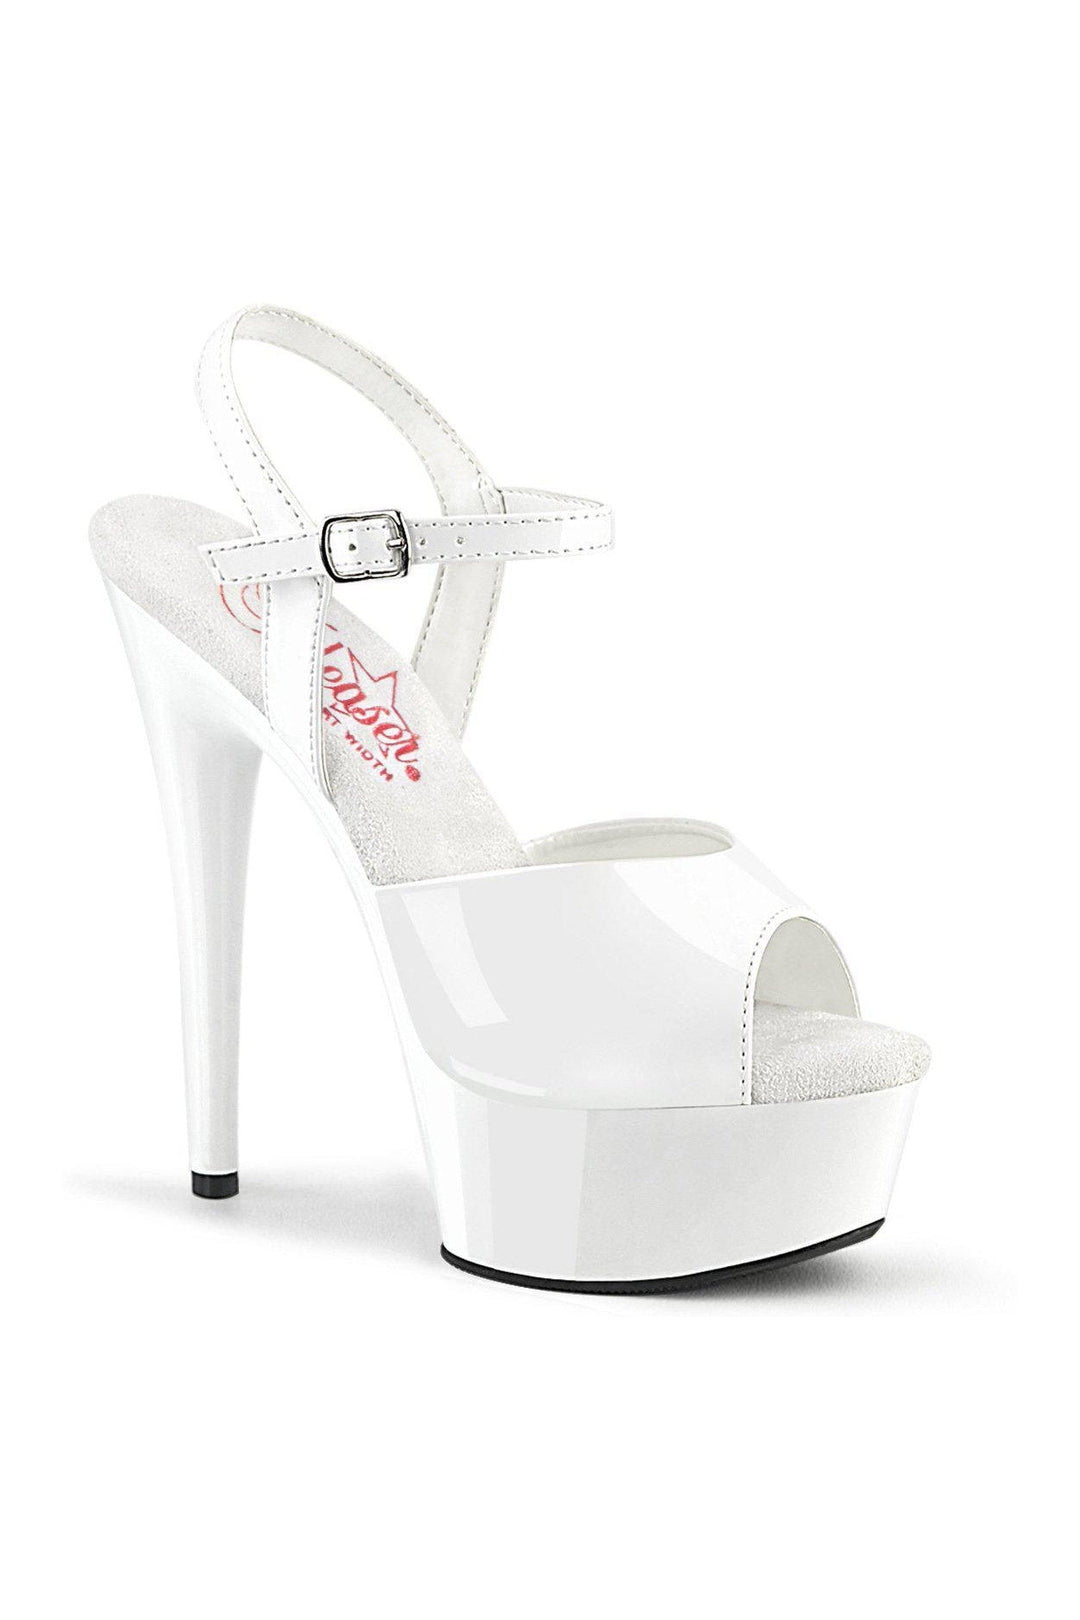 EXCITE-609 Sandal | White Patent-Sandals-Pleaser-White-7-Patent-SEXYSHOES.COM